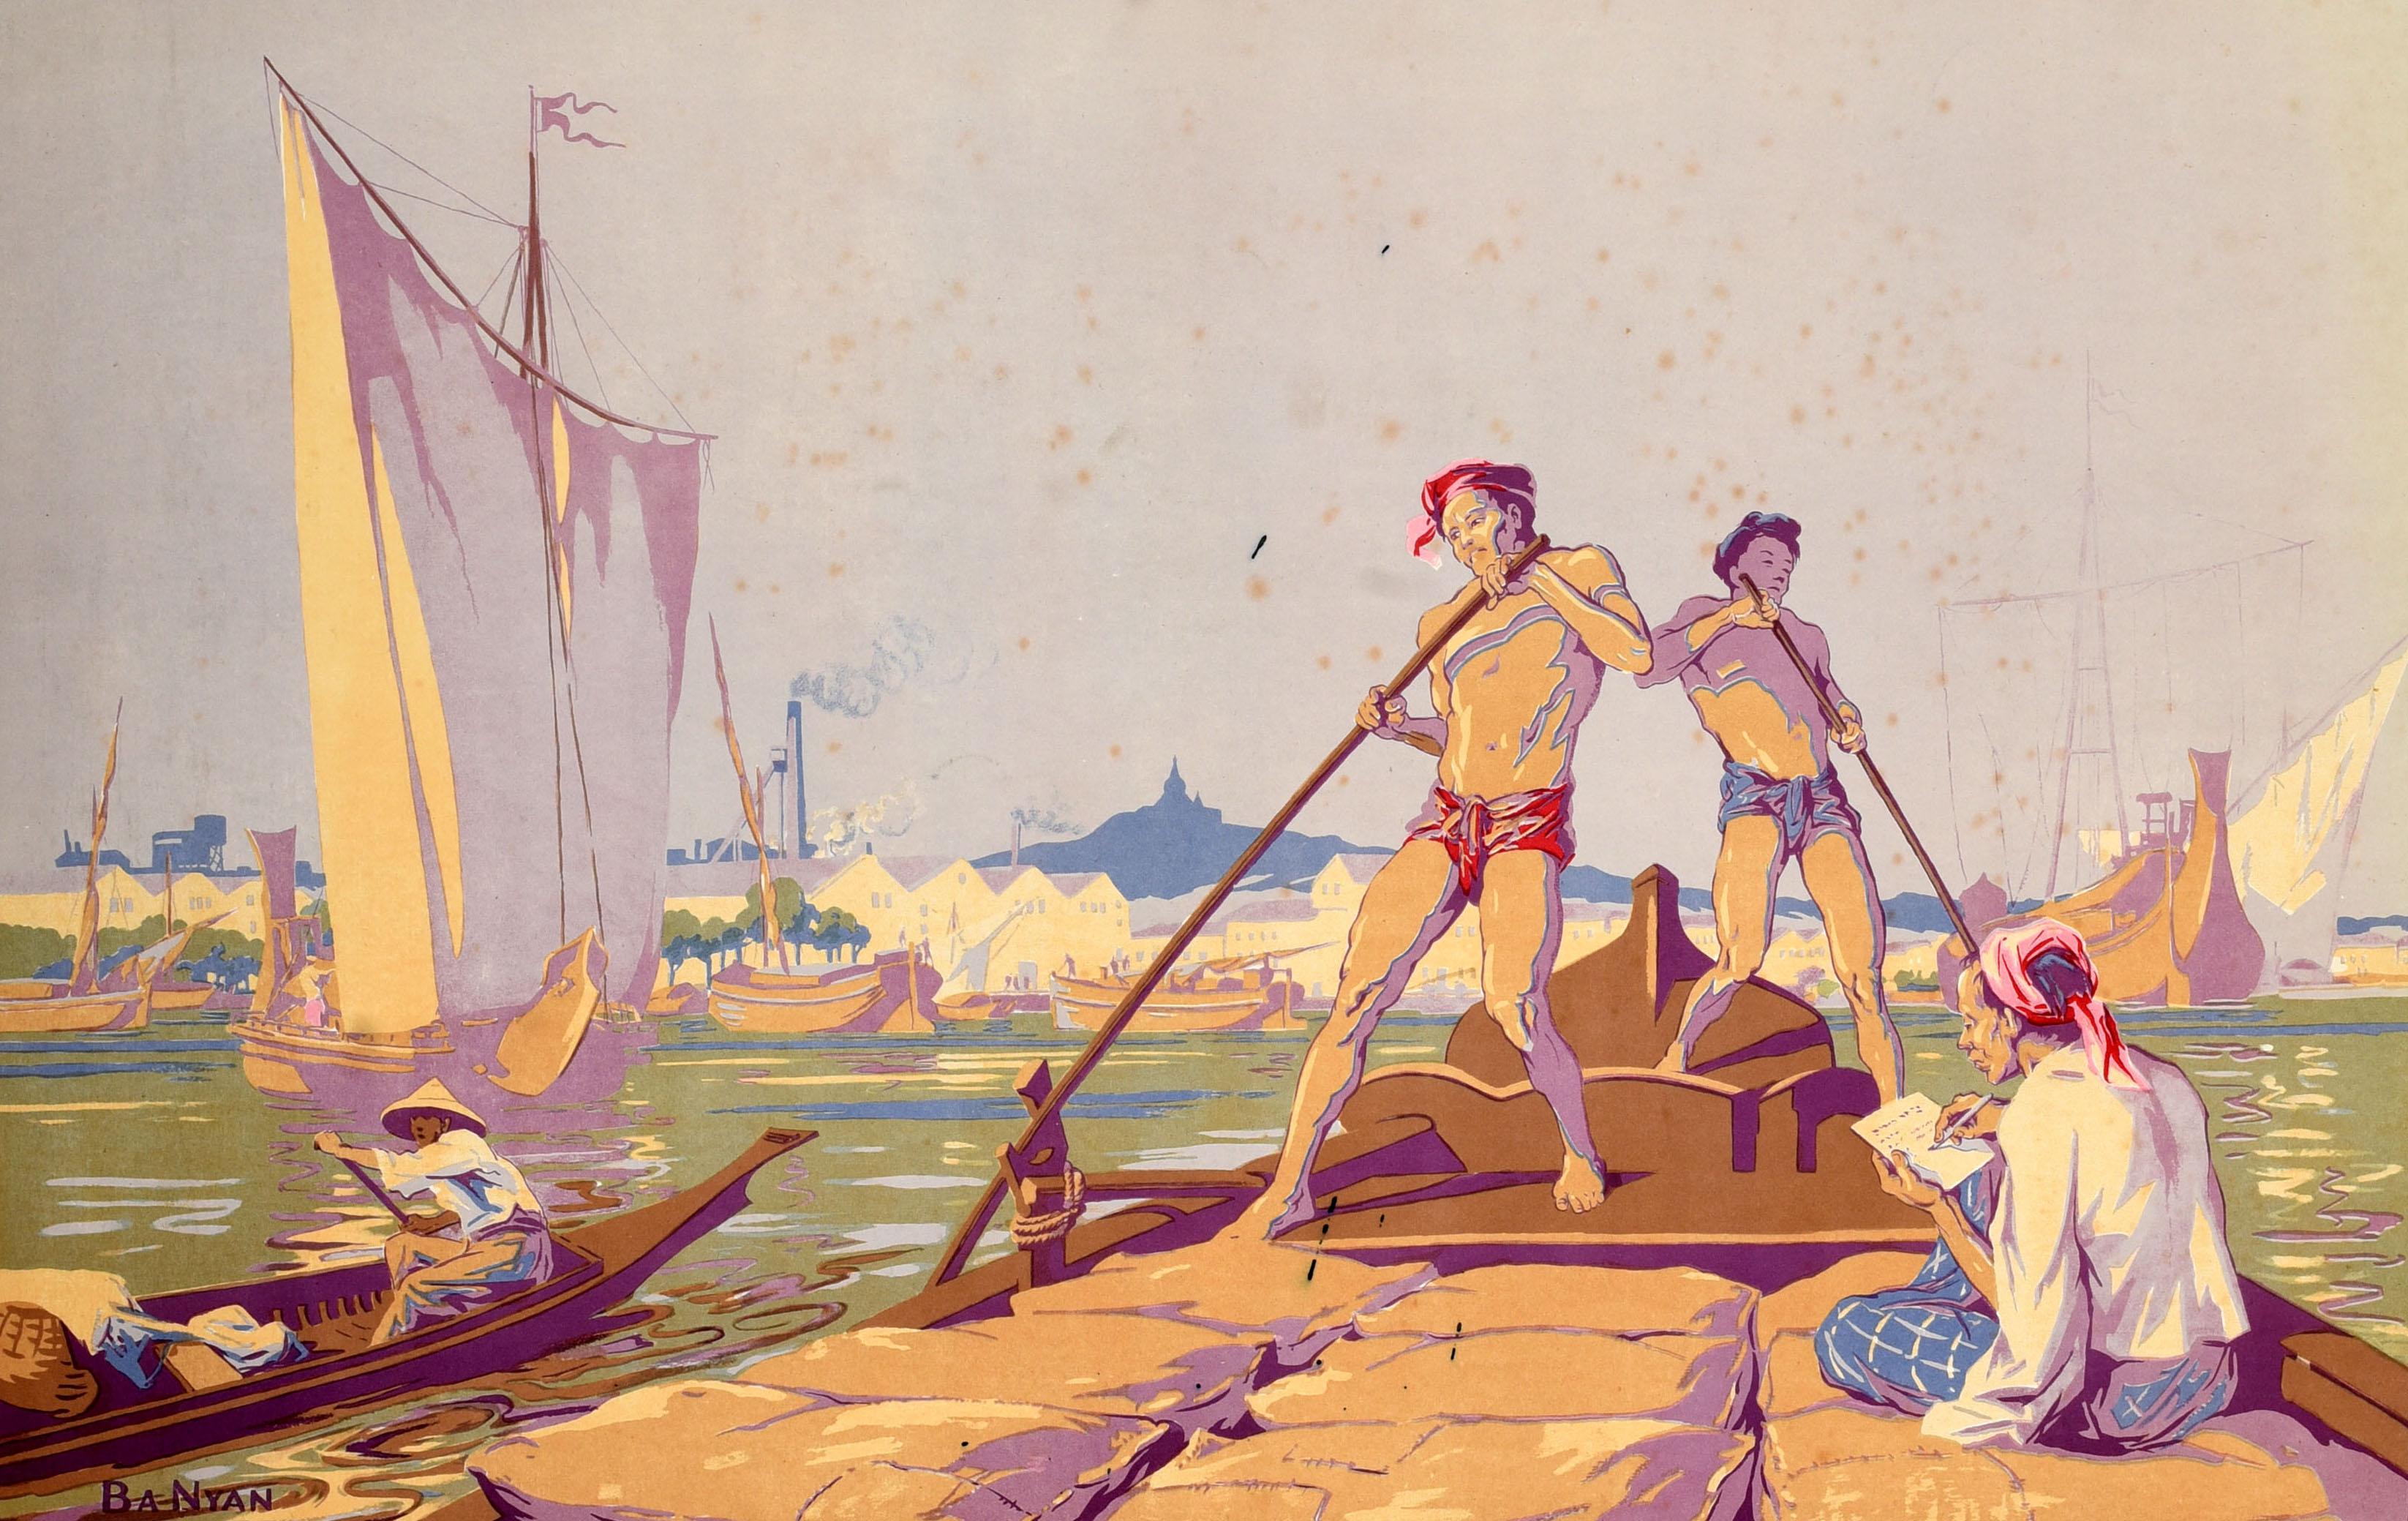 Original vintage poster - Rangoon Port - issued by the Empire Marketing Board (EMB 1926-1933) featuring artwork by the notable Burmese artist Ba Nyan (1897-1945) depicting men rowing wooden cargo boats in the foreground with sailing boats and